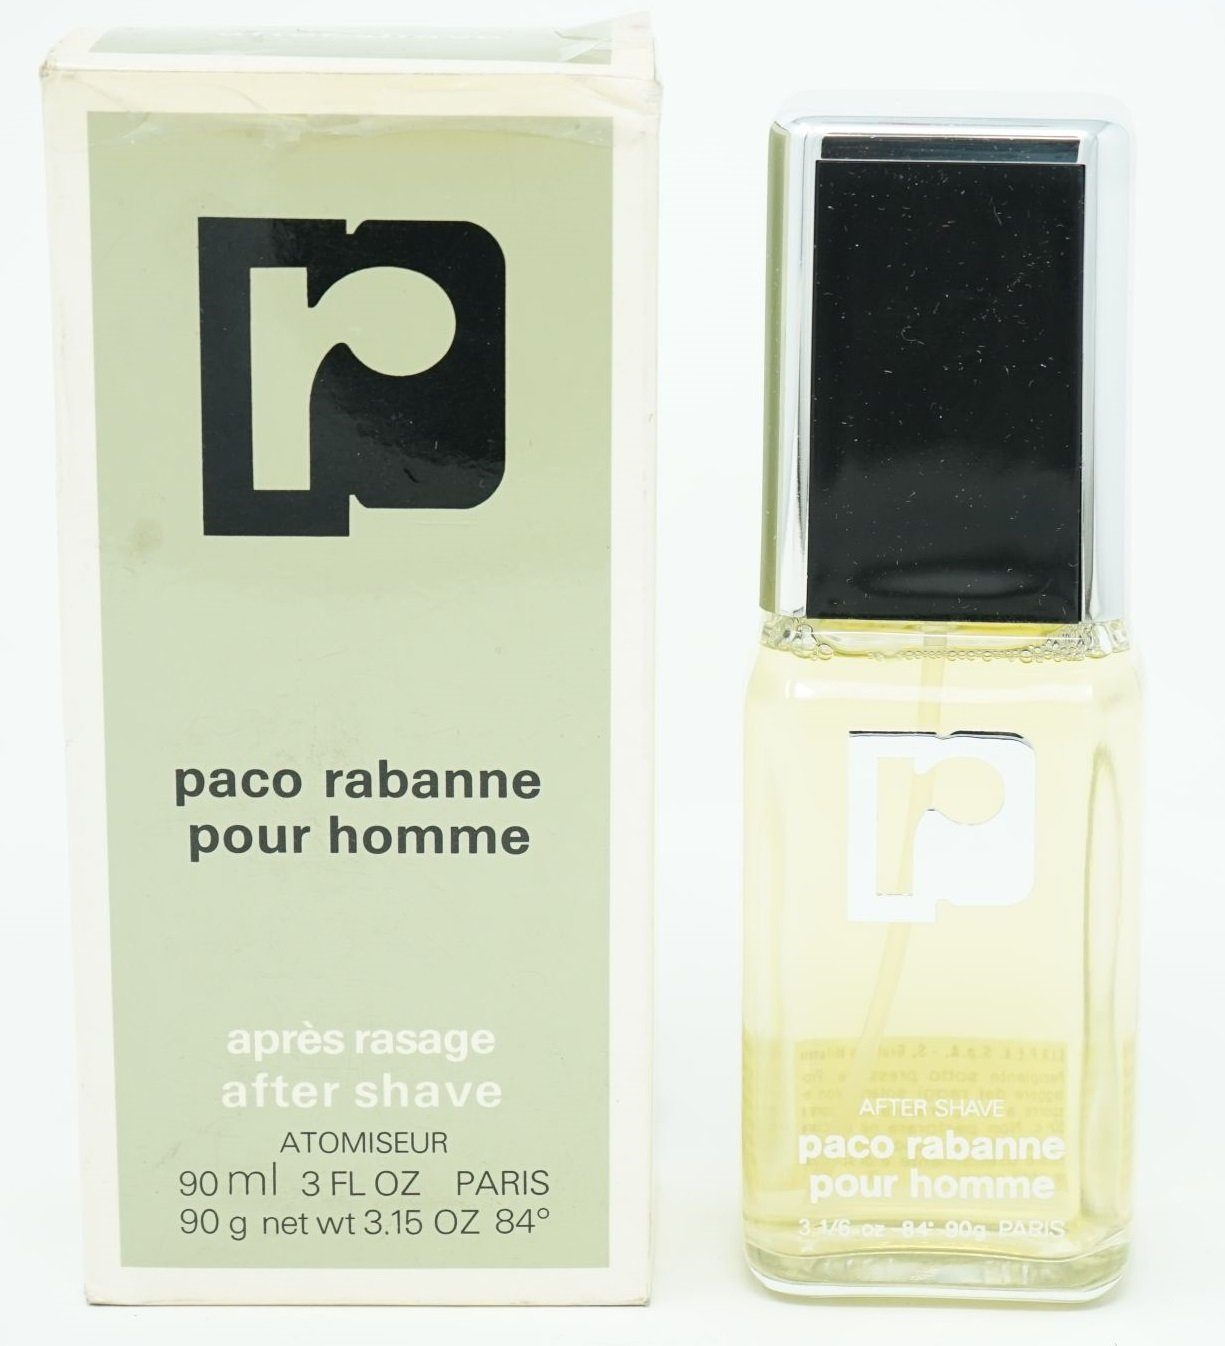 paco rabanne After-Shave Paco Rabanne Pour Homme After Shave Atomiseur 90 ml